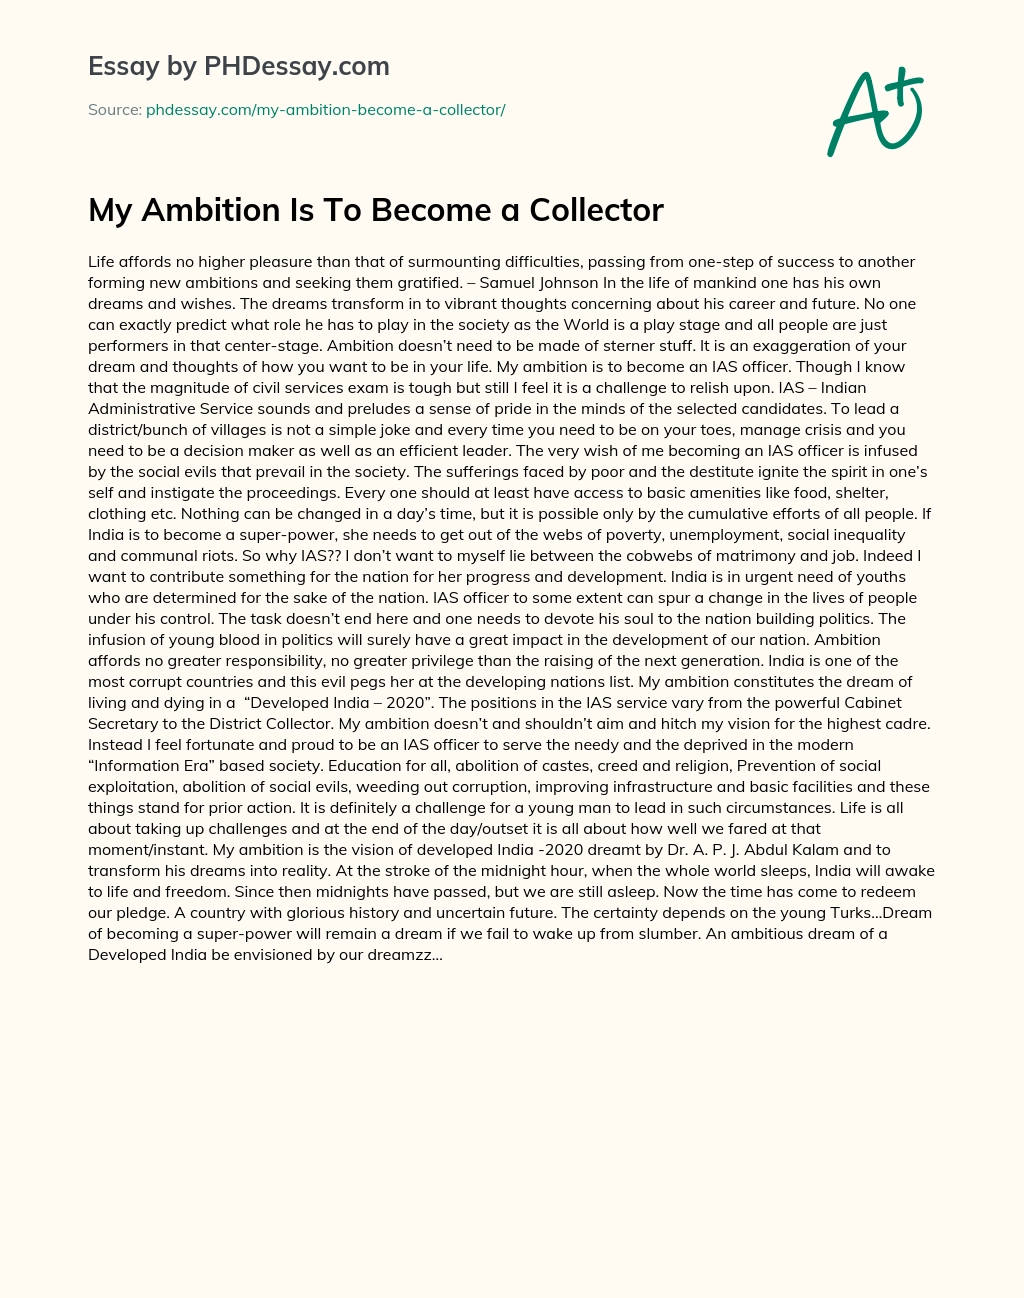 My Ambition Is To Become a Collector essay